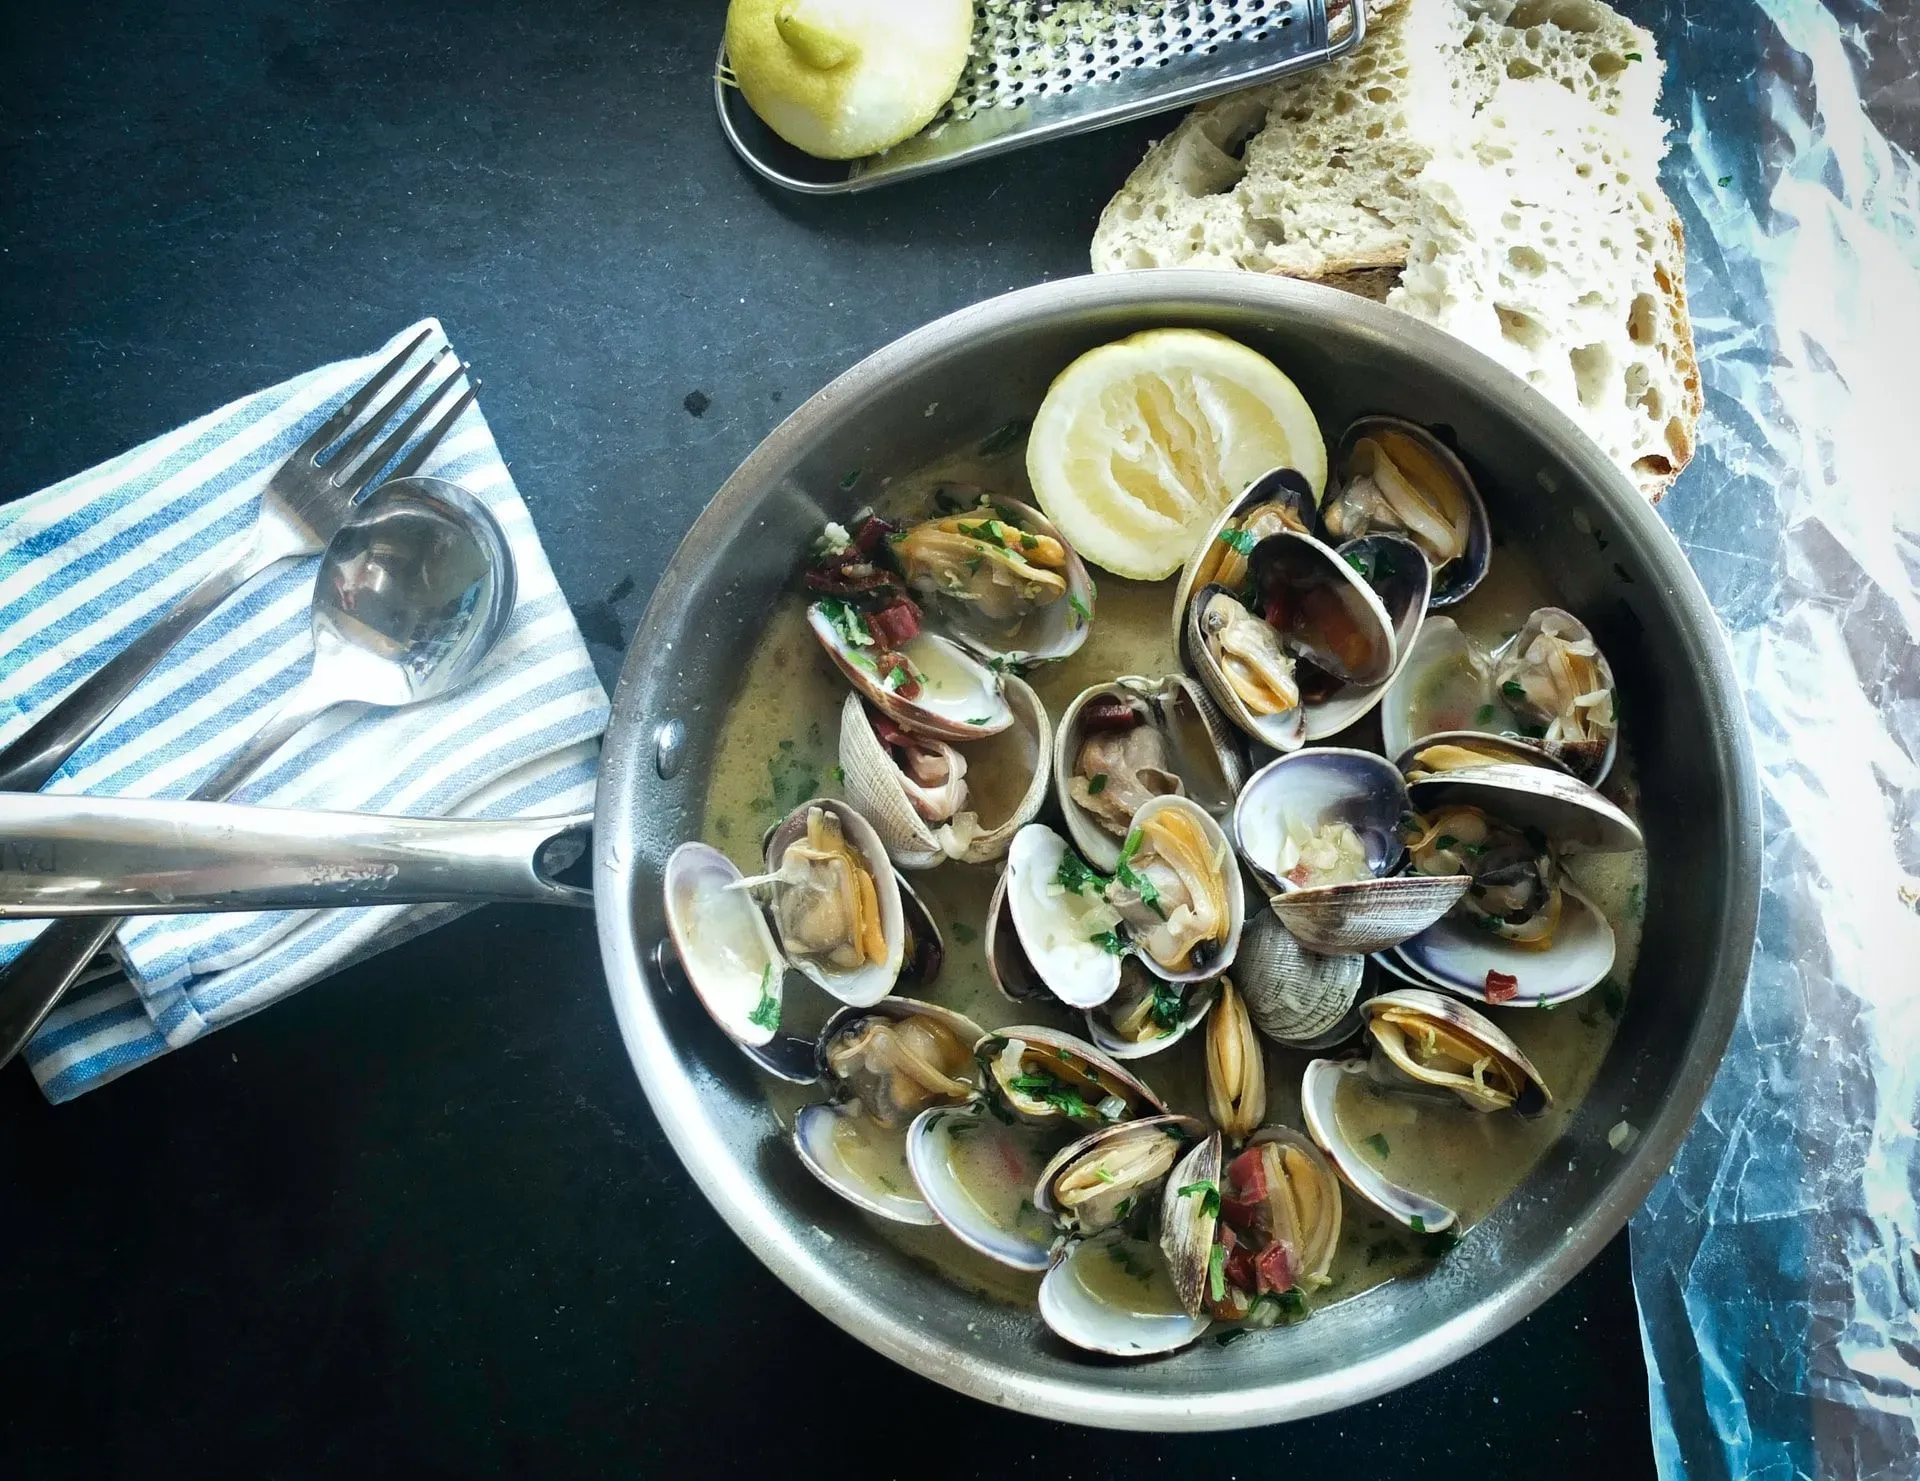 Both clams and oysters are pretty low in fat making them excellent seafood choices.